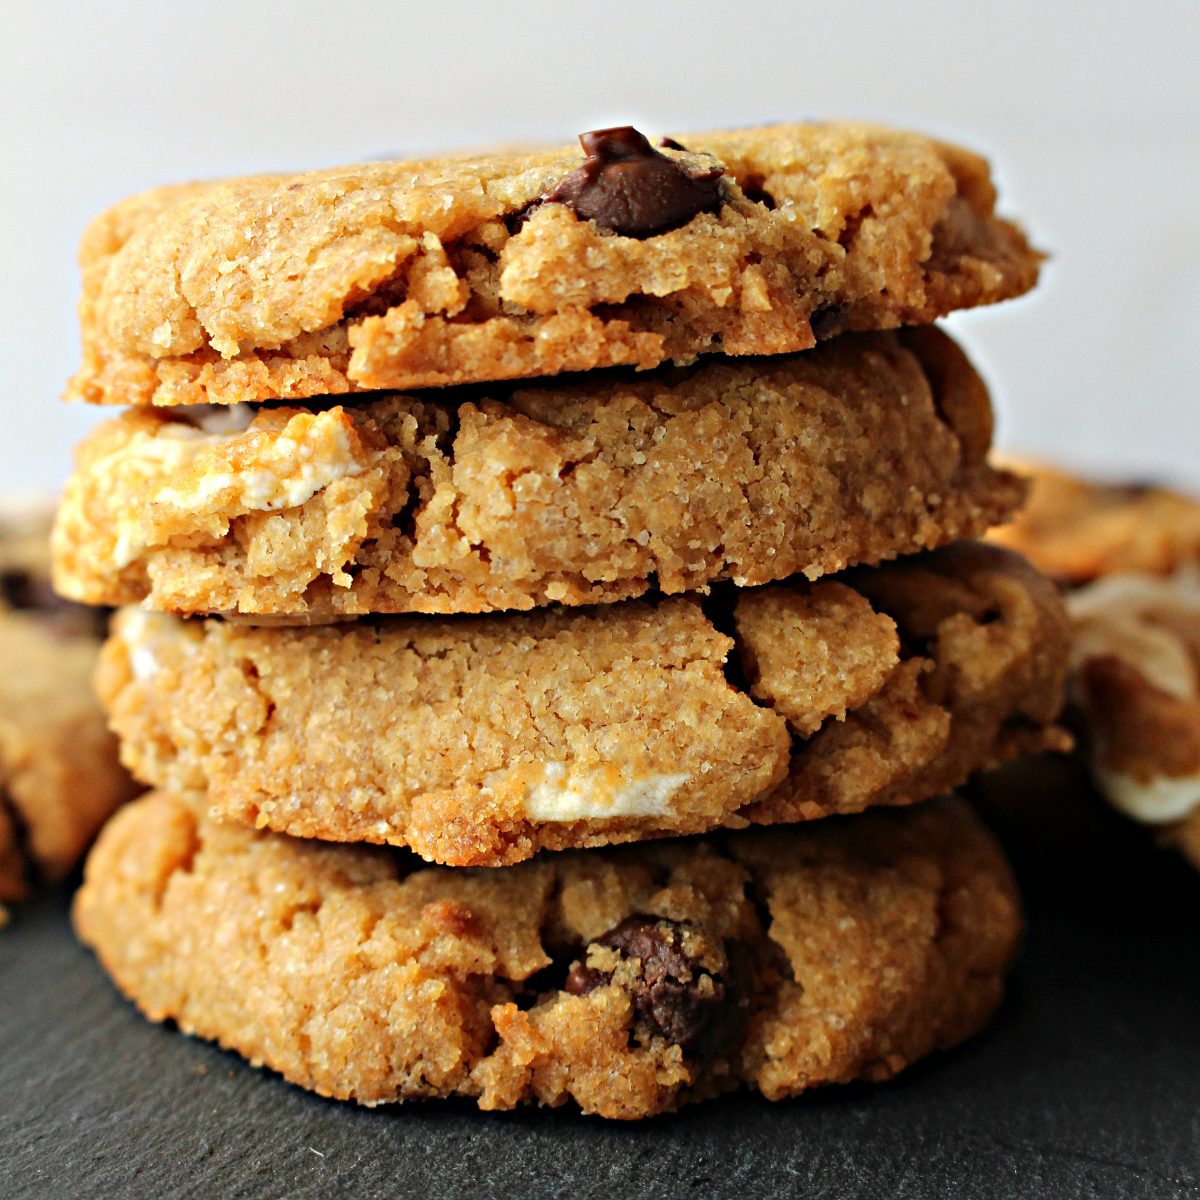 Stack of gluten free s'mores cookies showing thick cookie with chocolate chips and marshmallows.